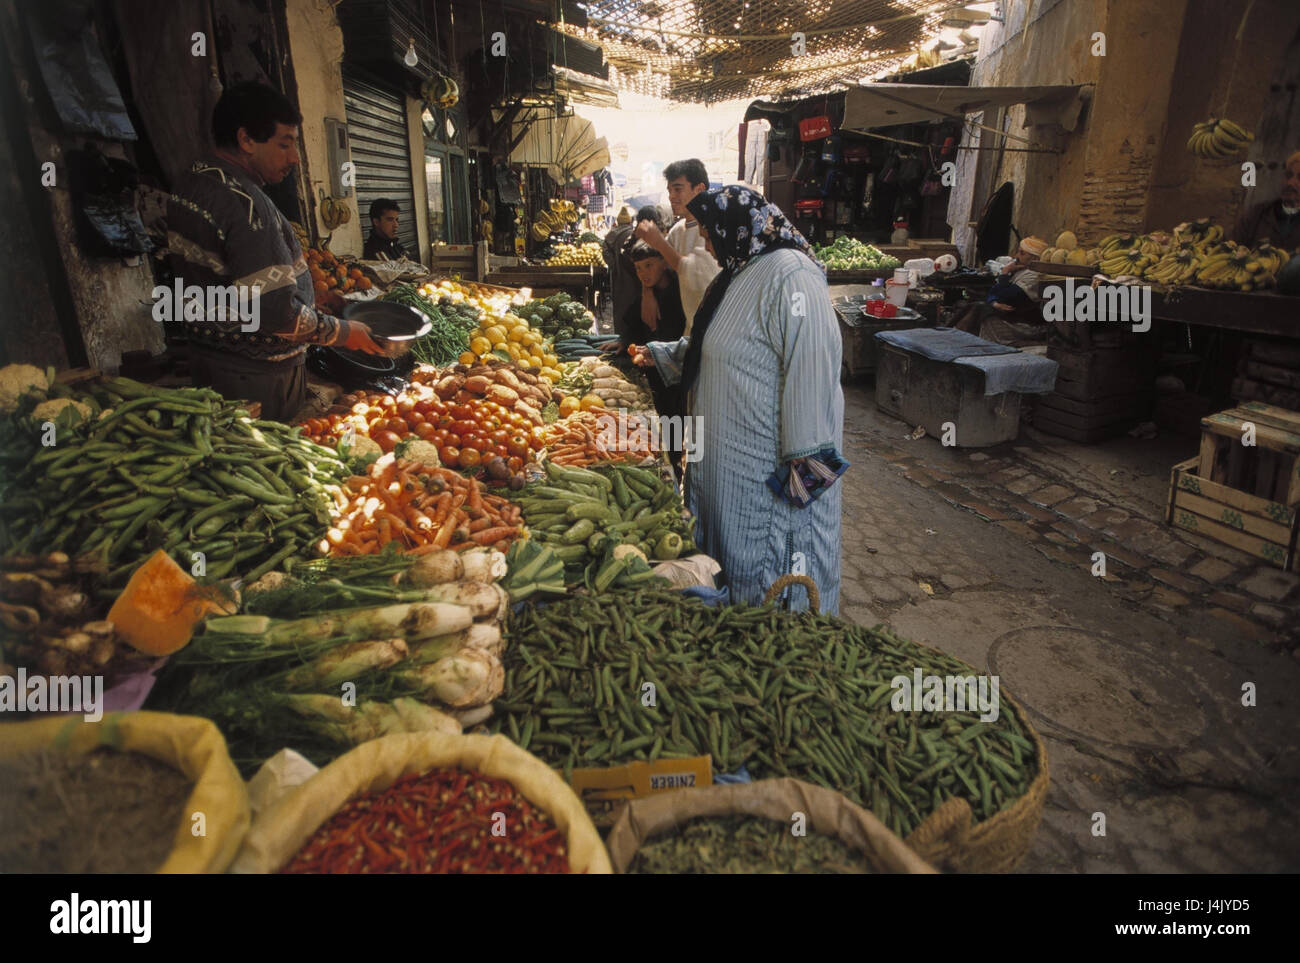 Morocco, fez, Souk, market, locals, sales, food no model release, Africa, city wall, defensive wall, weekly market, sell, make purchases, economy, fruit, fruits, vegetables, food, trade, outside Stock Photo